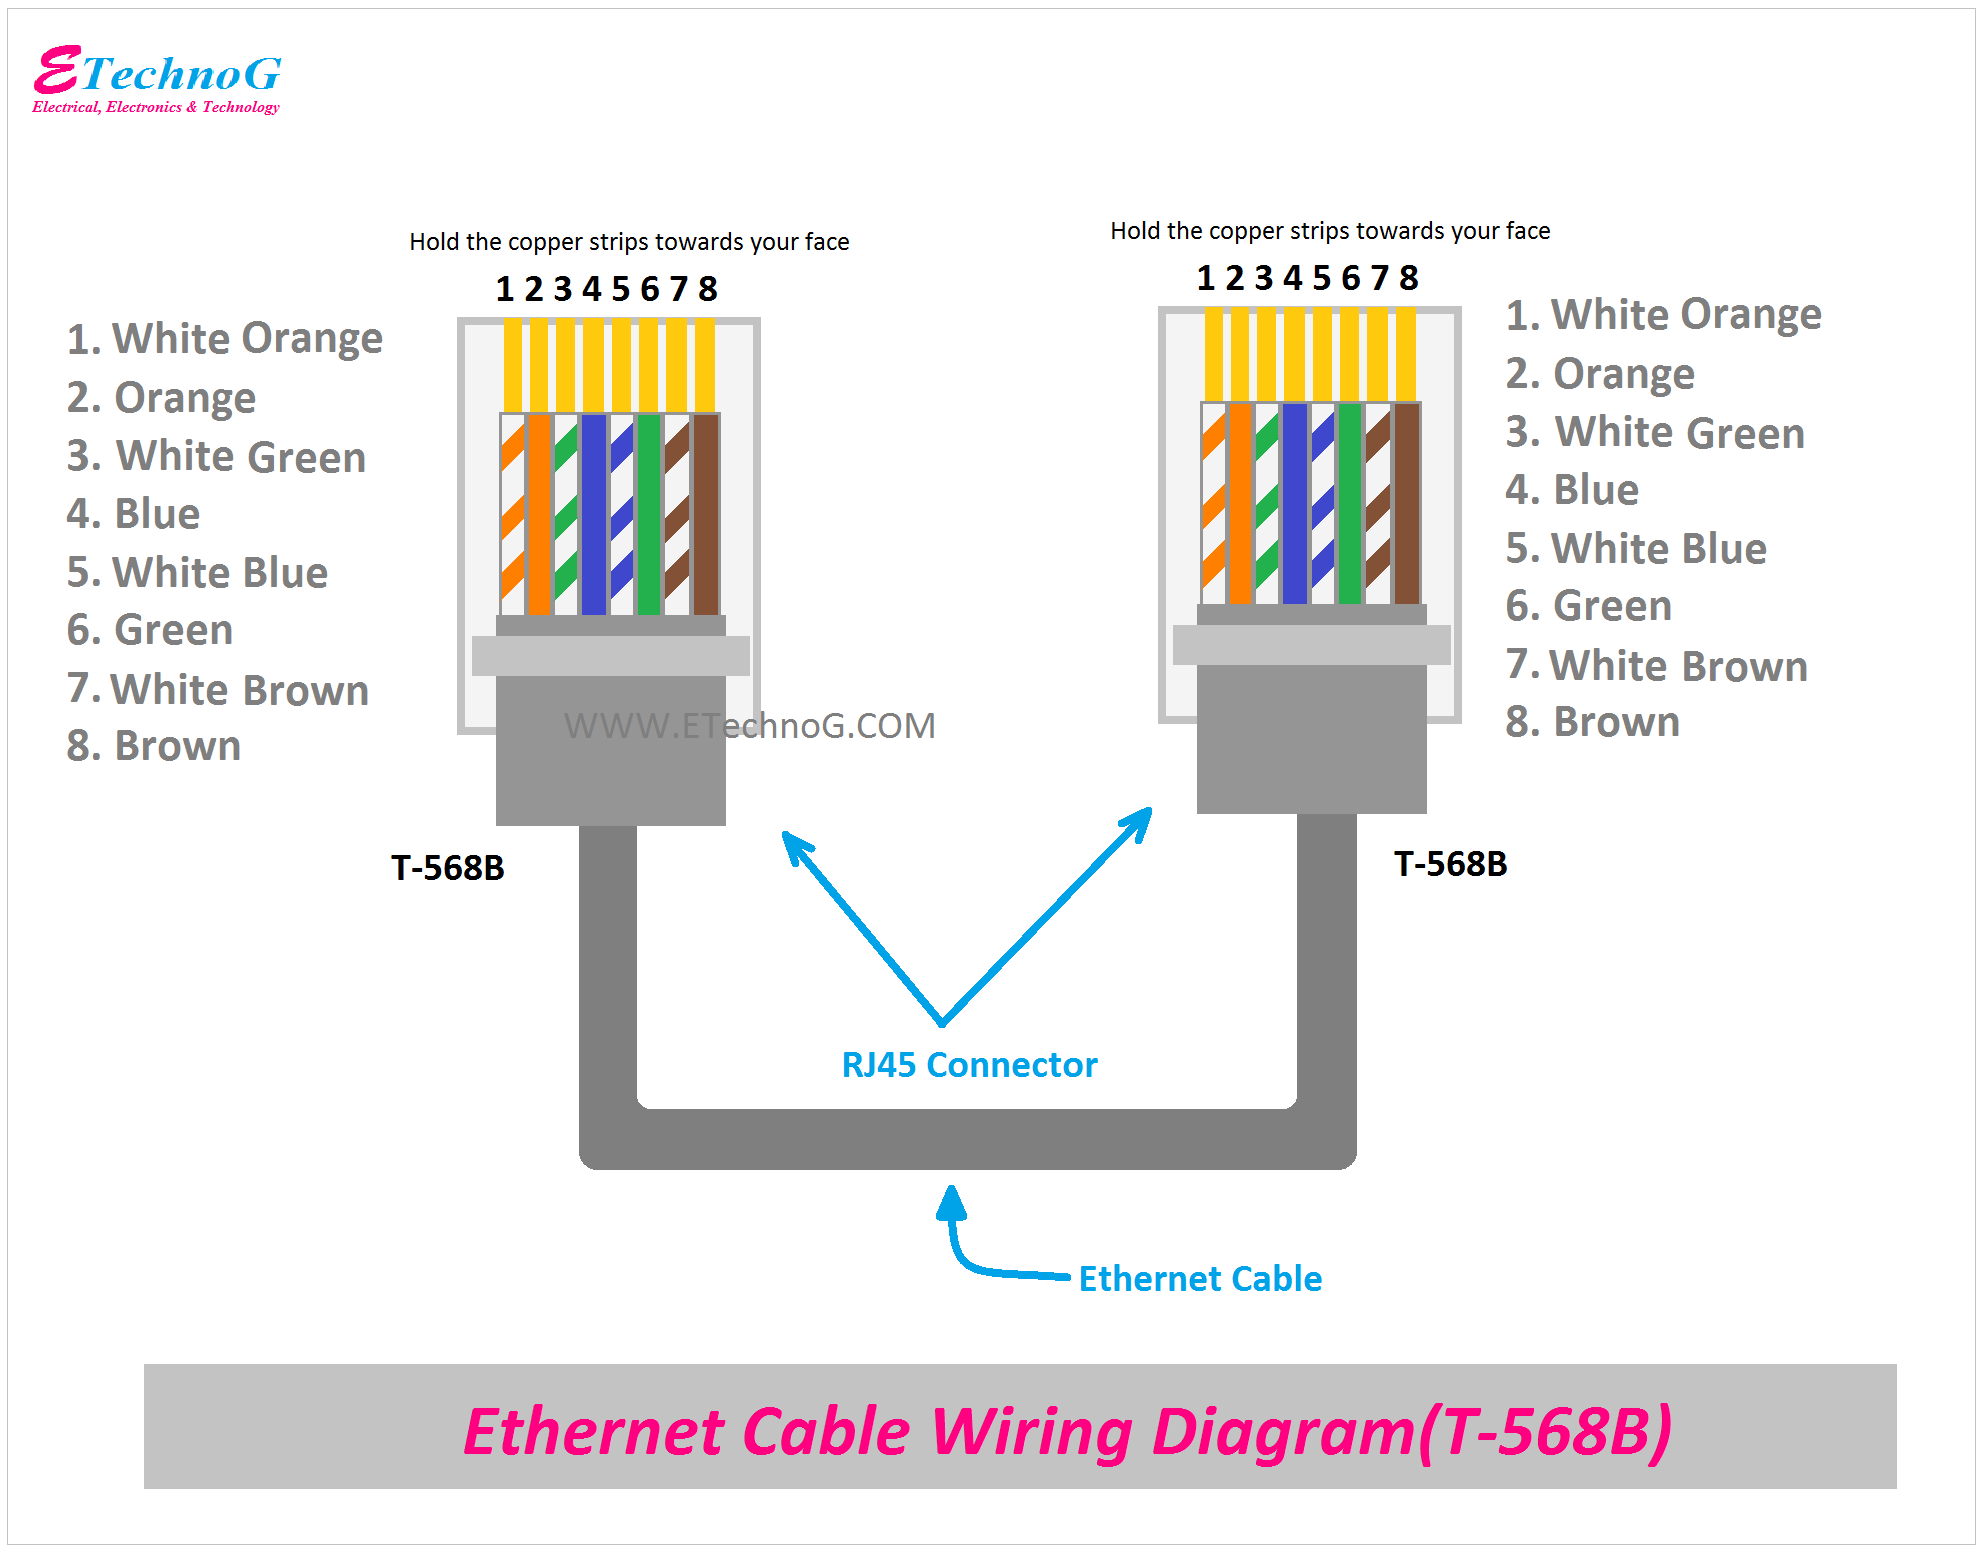 Ethernet Cable Wiring Diagram With Color Code For Cat5 Cat6 Etechnog